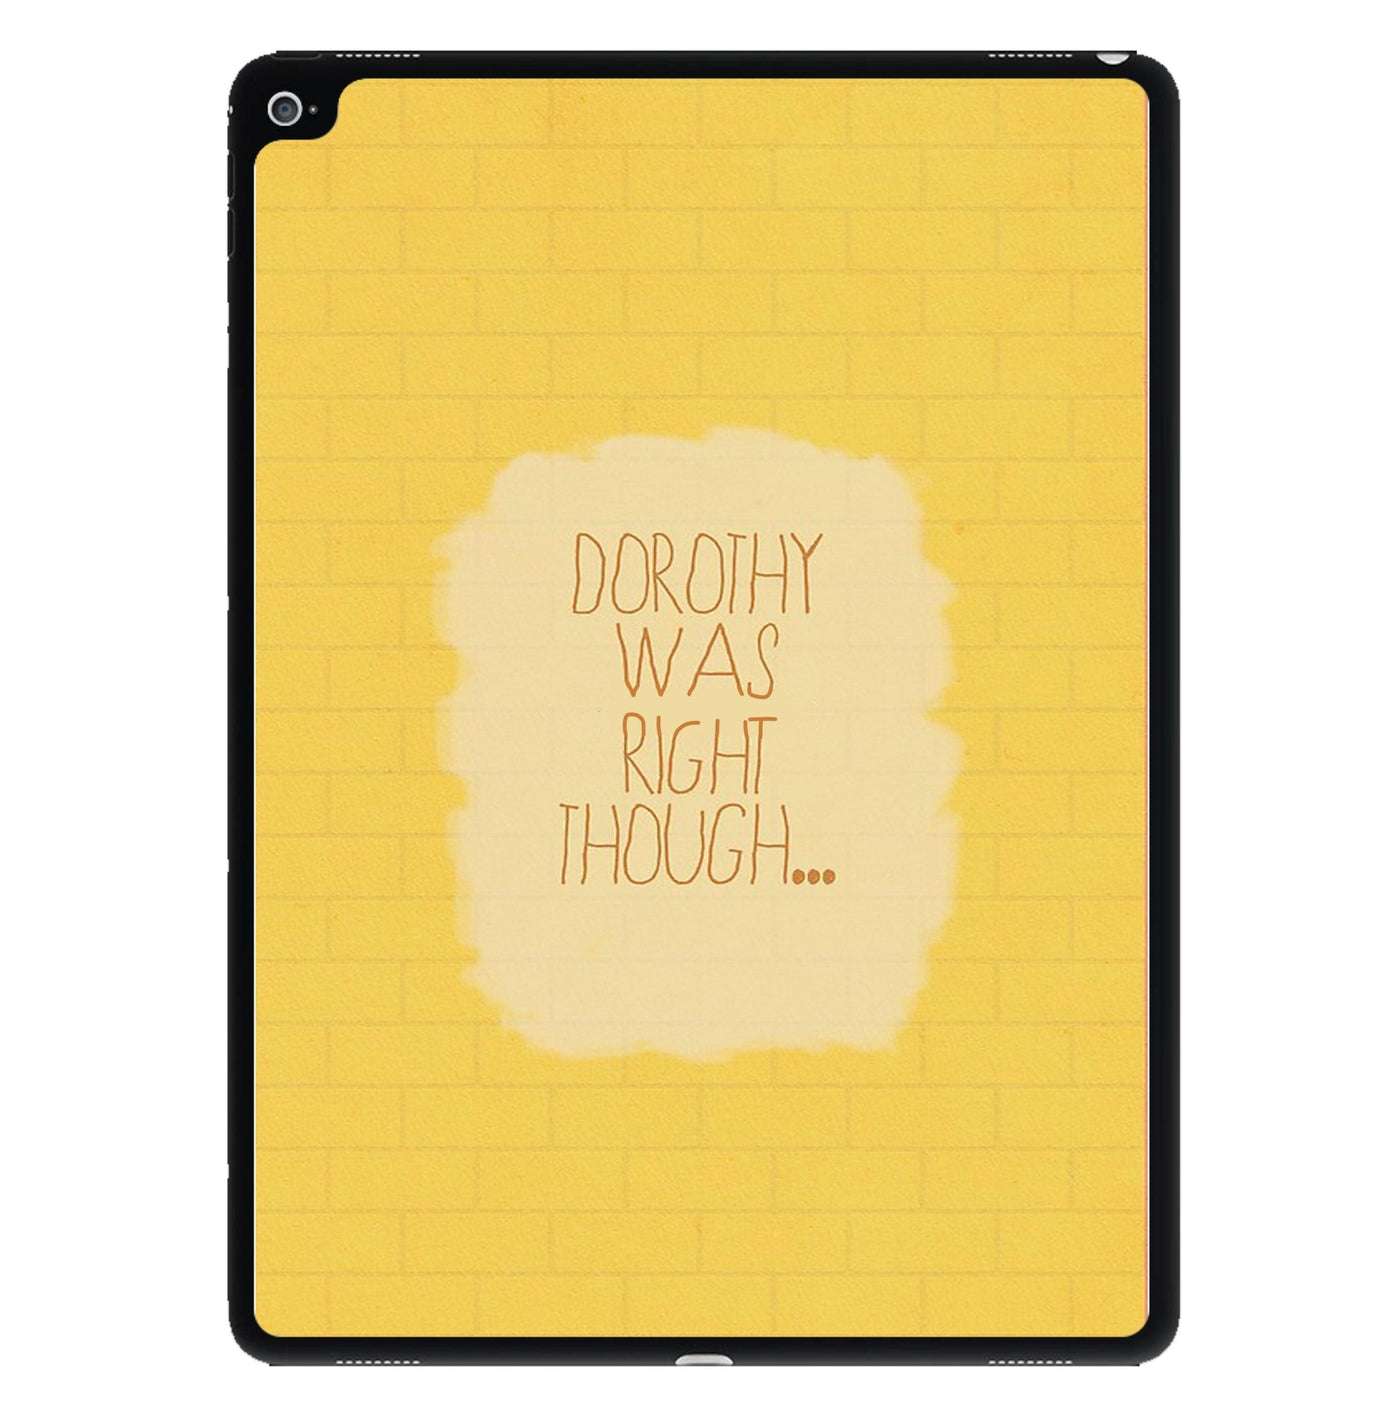 But Dorothy Was Right Though - Arctic Monkeys iPad Case